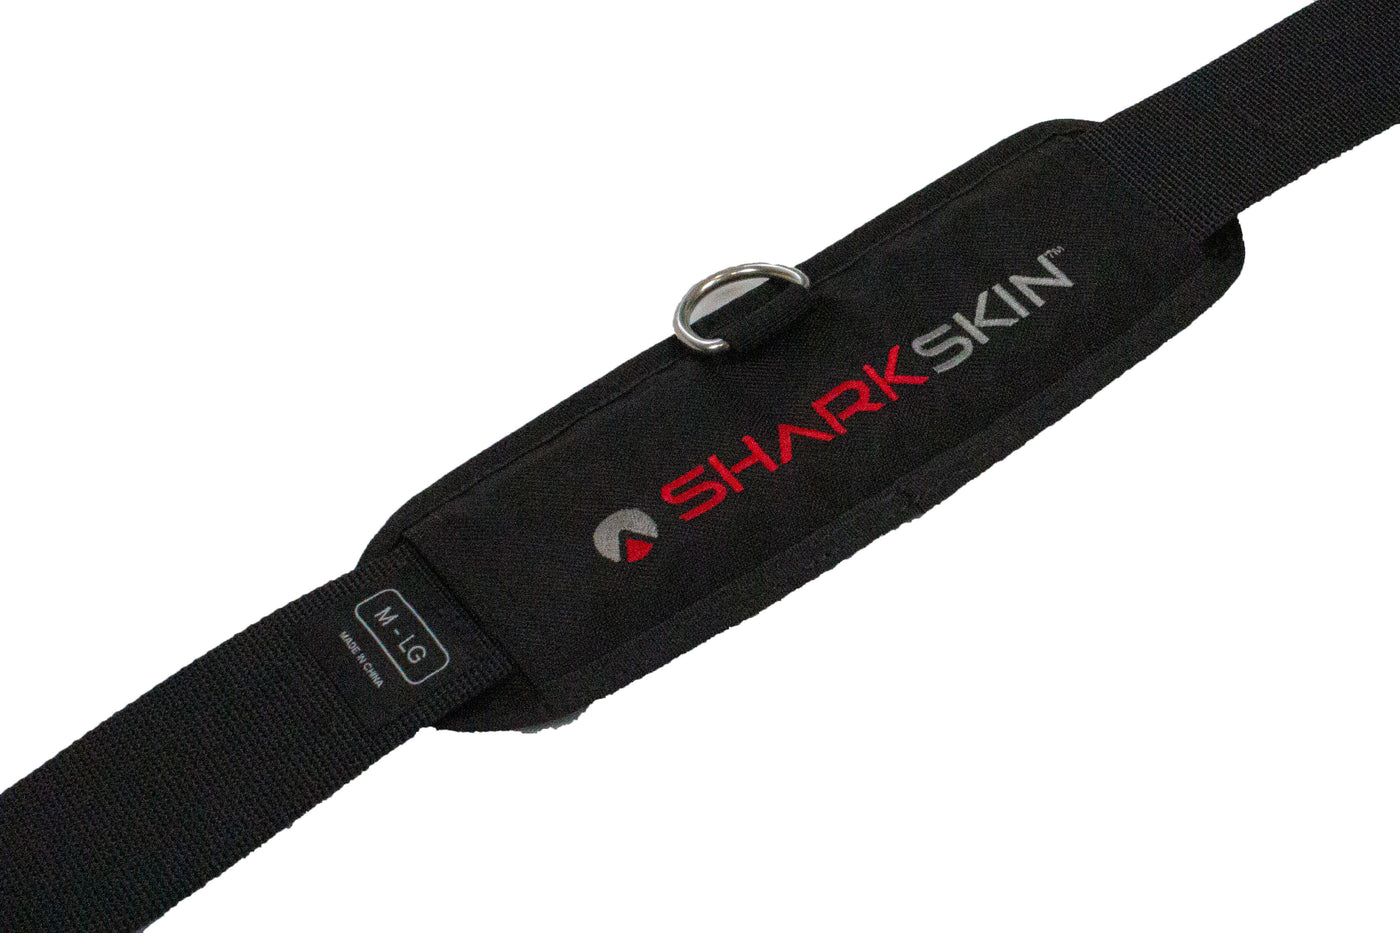 WEIGHT BELT WITHOUT POCKET MED-LGE (INCLUDES S/S BUCKLE)